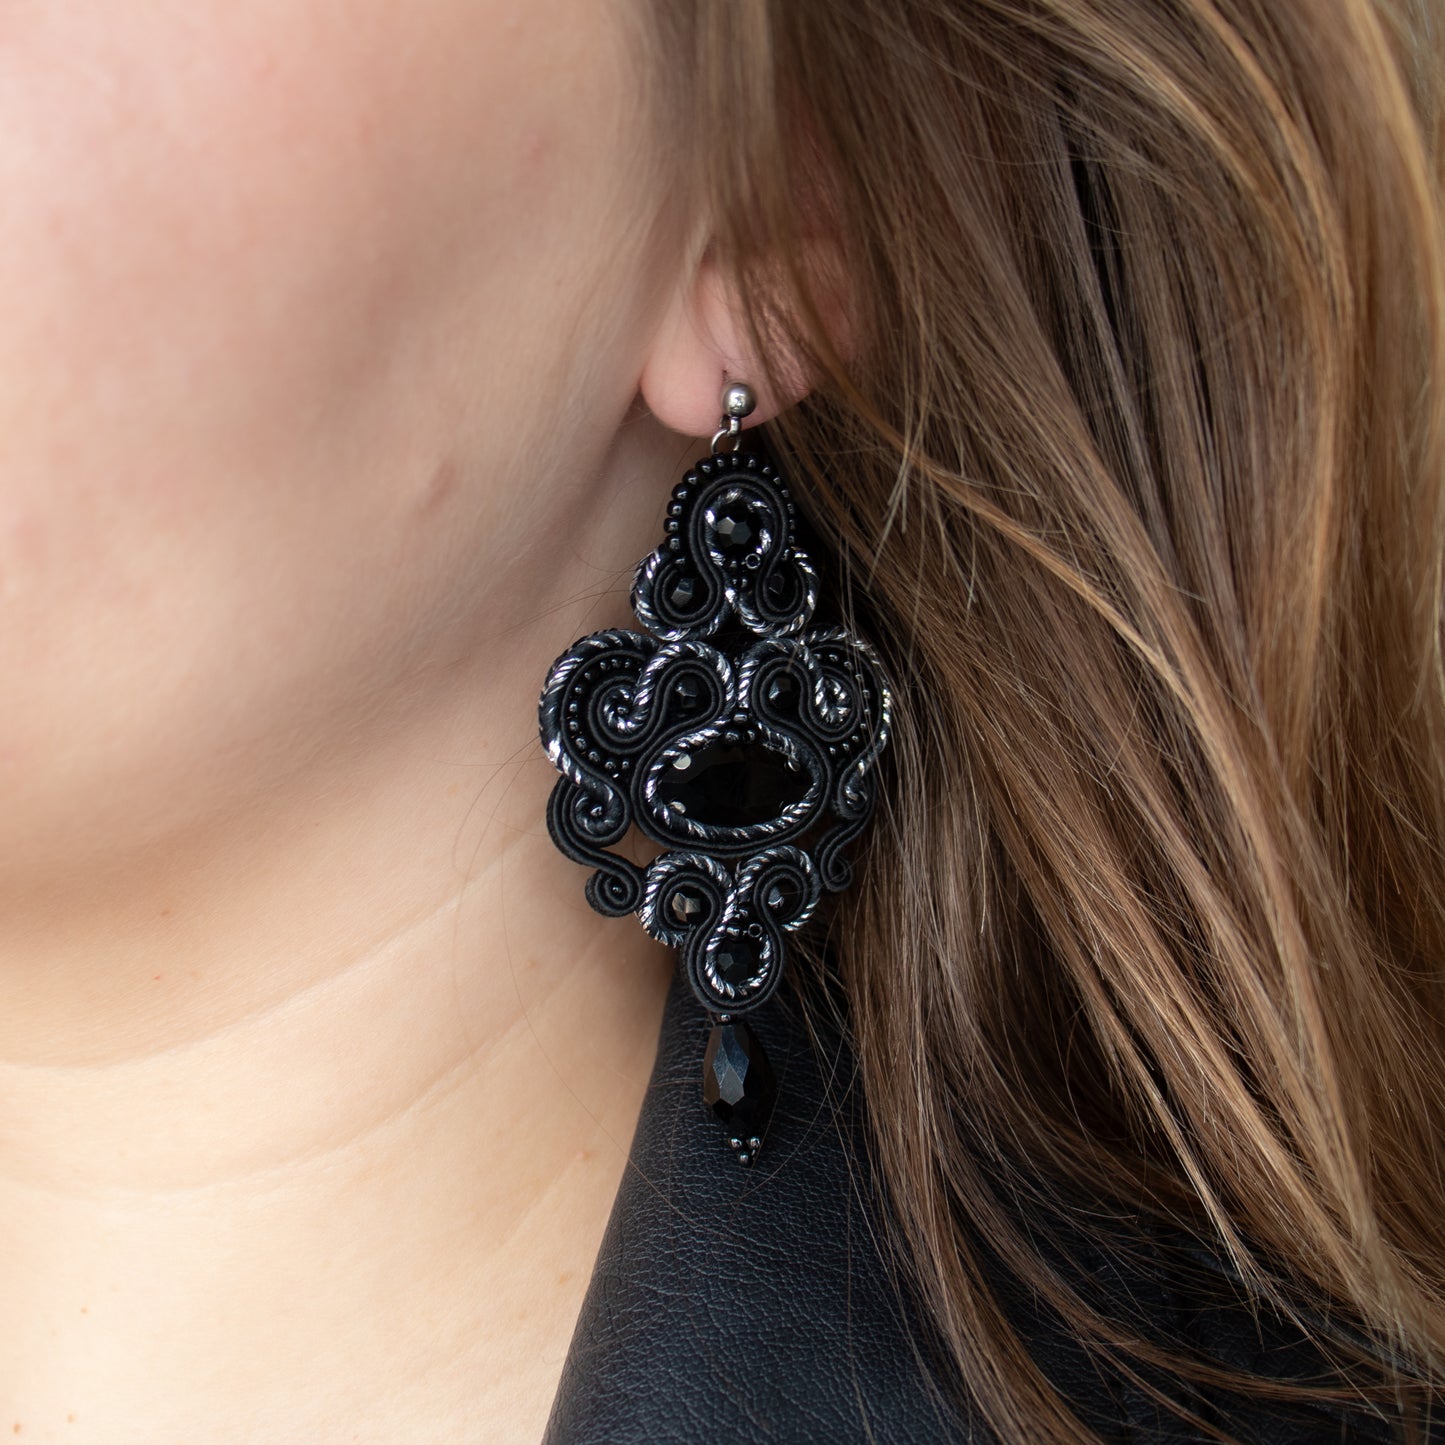 Black and silver soutache earrings. Unique and exclusive earrings.